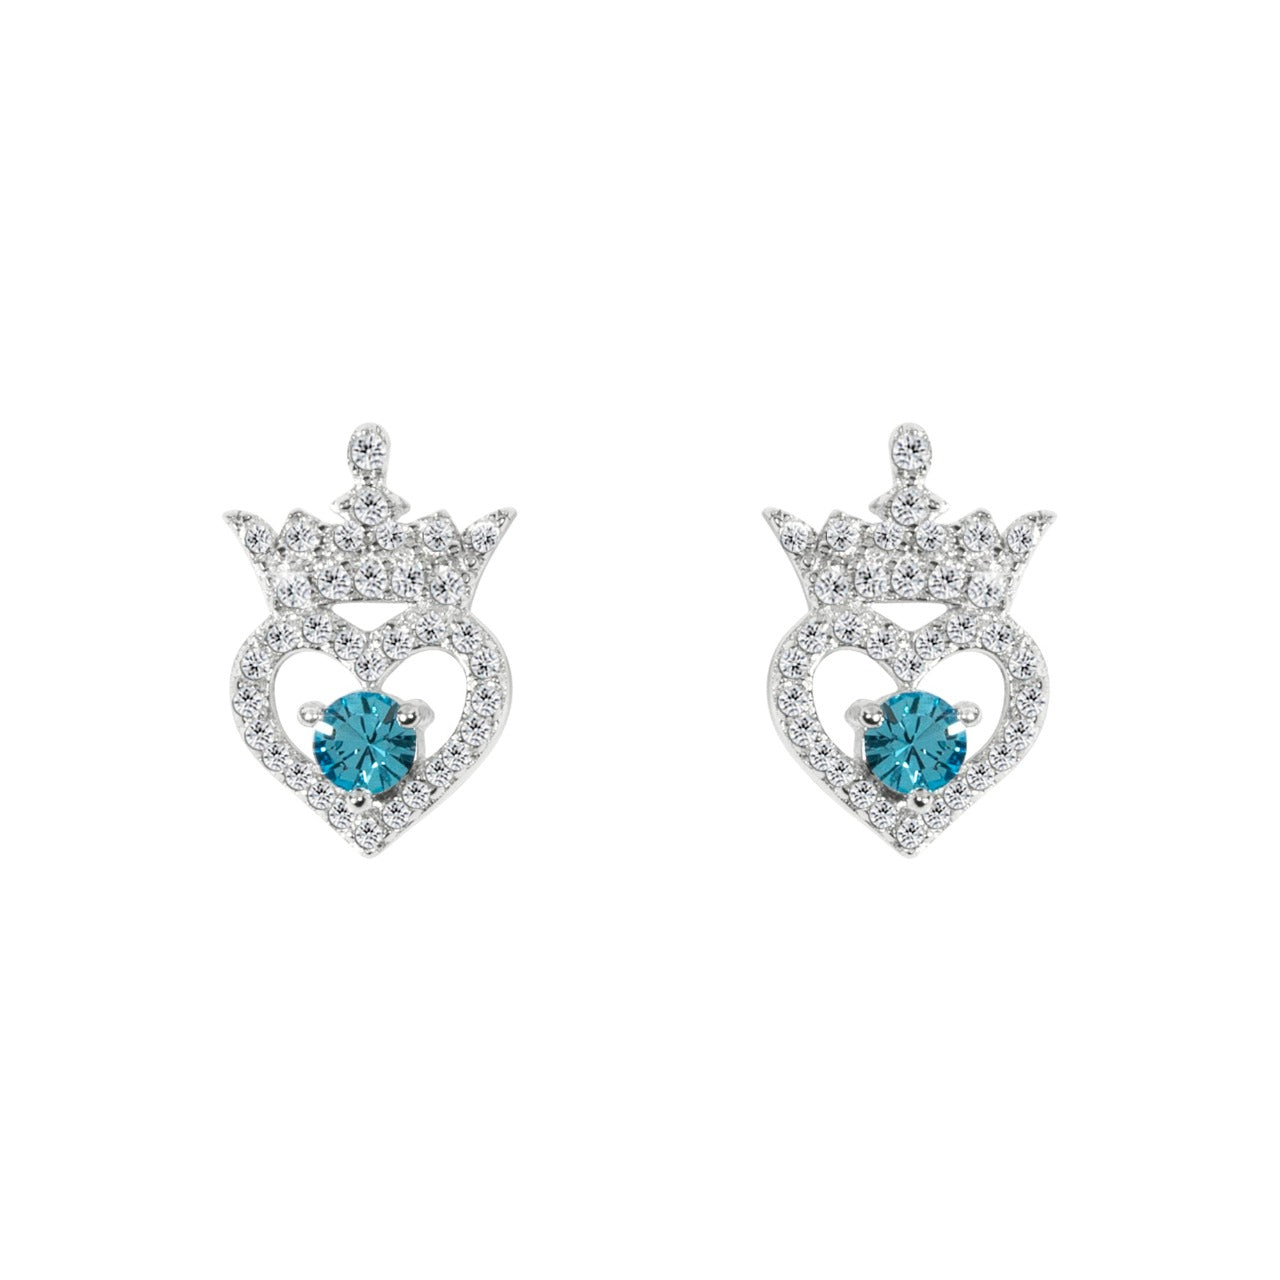 Disney Princess Sterling Silver Birthstone Crown Earrings – March  Beautiful silver Birthstone princess crown earrings with CZ crystals adding a feminine touch to the Disney classic piece of Jewellery.  Trendy and fashionable design, the Disney princess sterling silver earrings add a chic, fun touch to any outfit. the perfect gift for any Disney Princess fan.